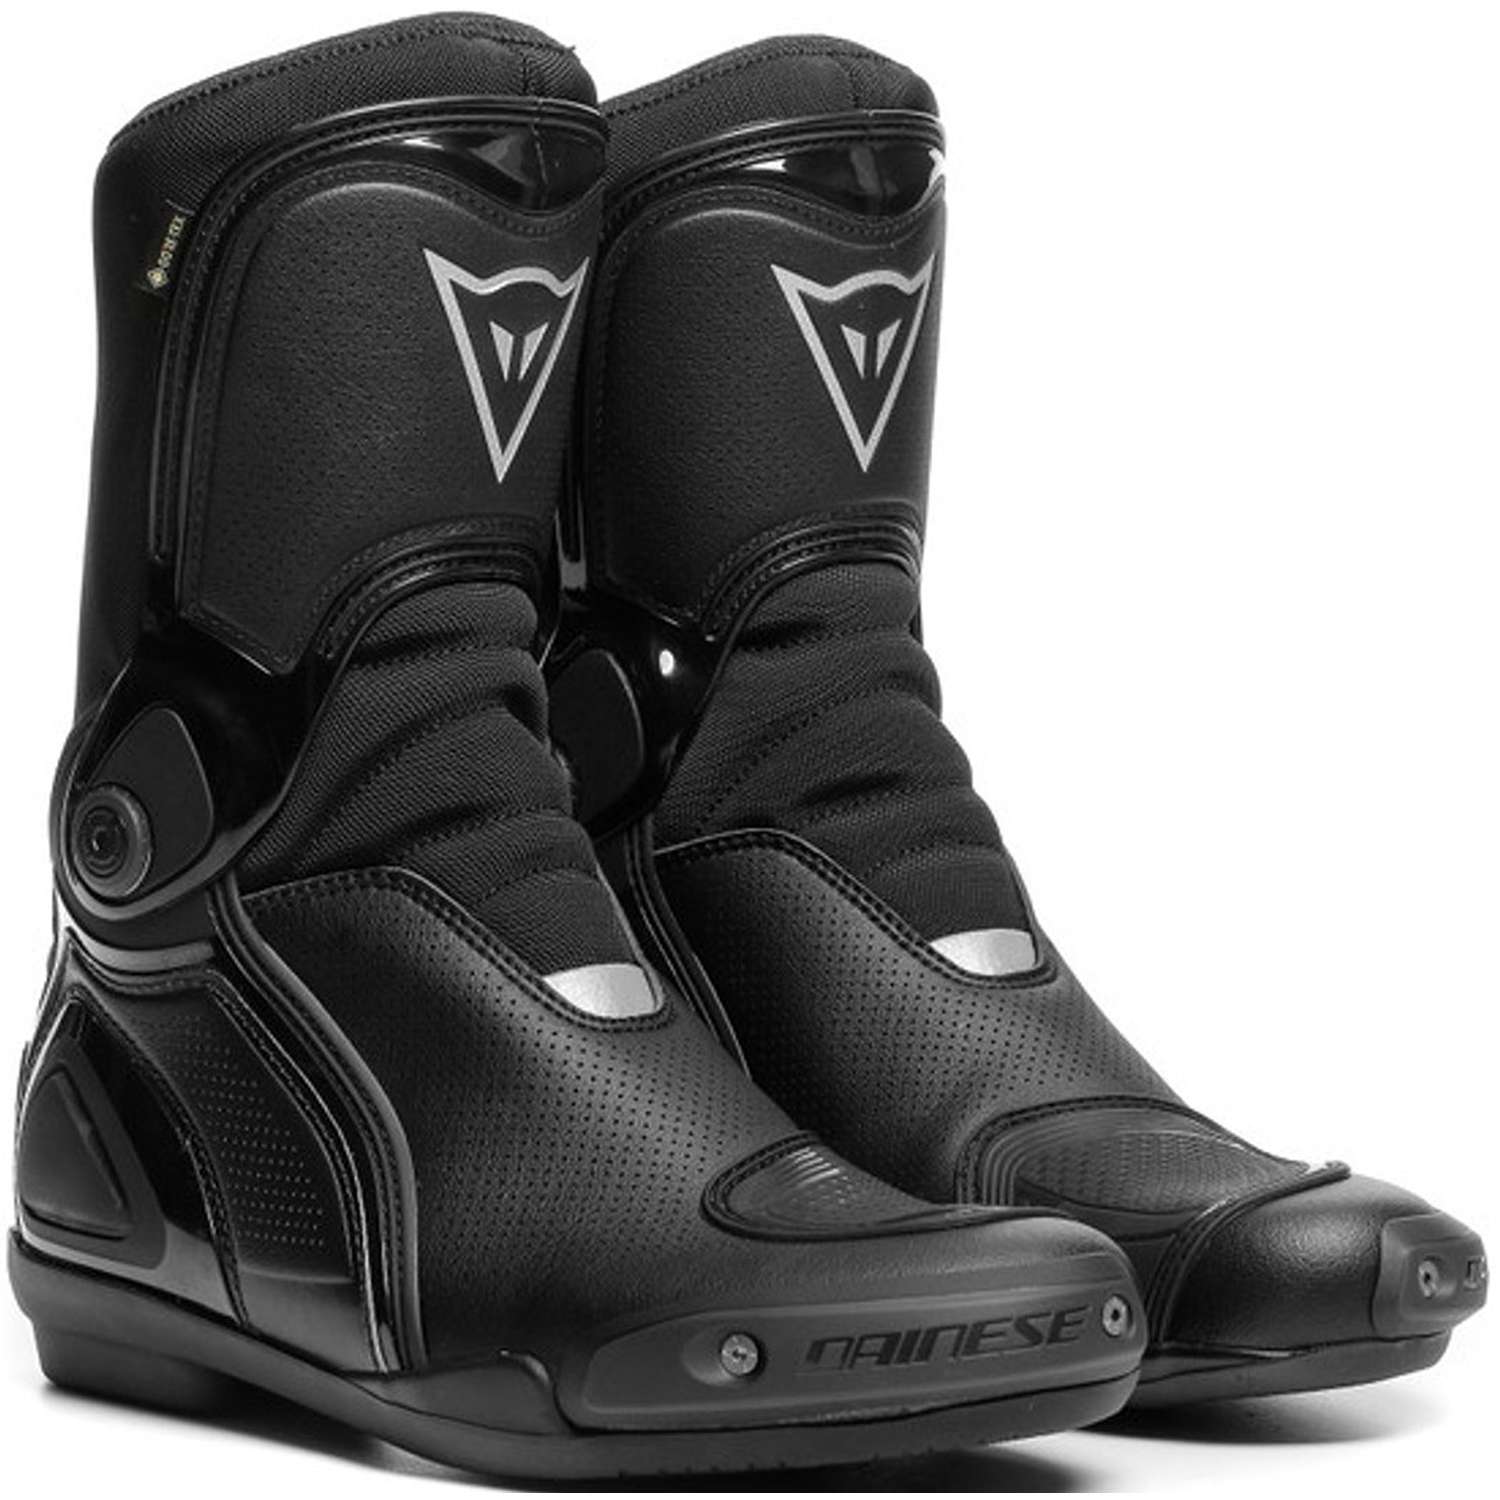 Image of Dainese Sport Master Gore-Tex Boots Black Size 40 EN